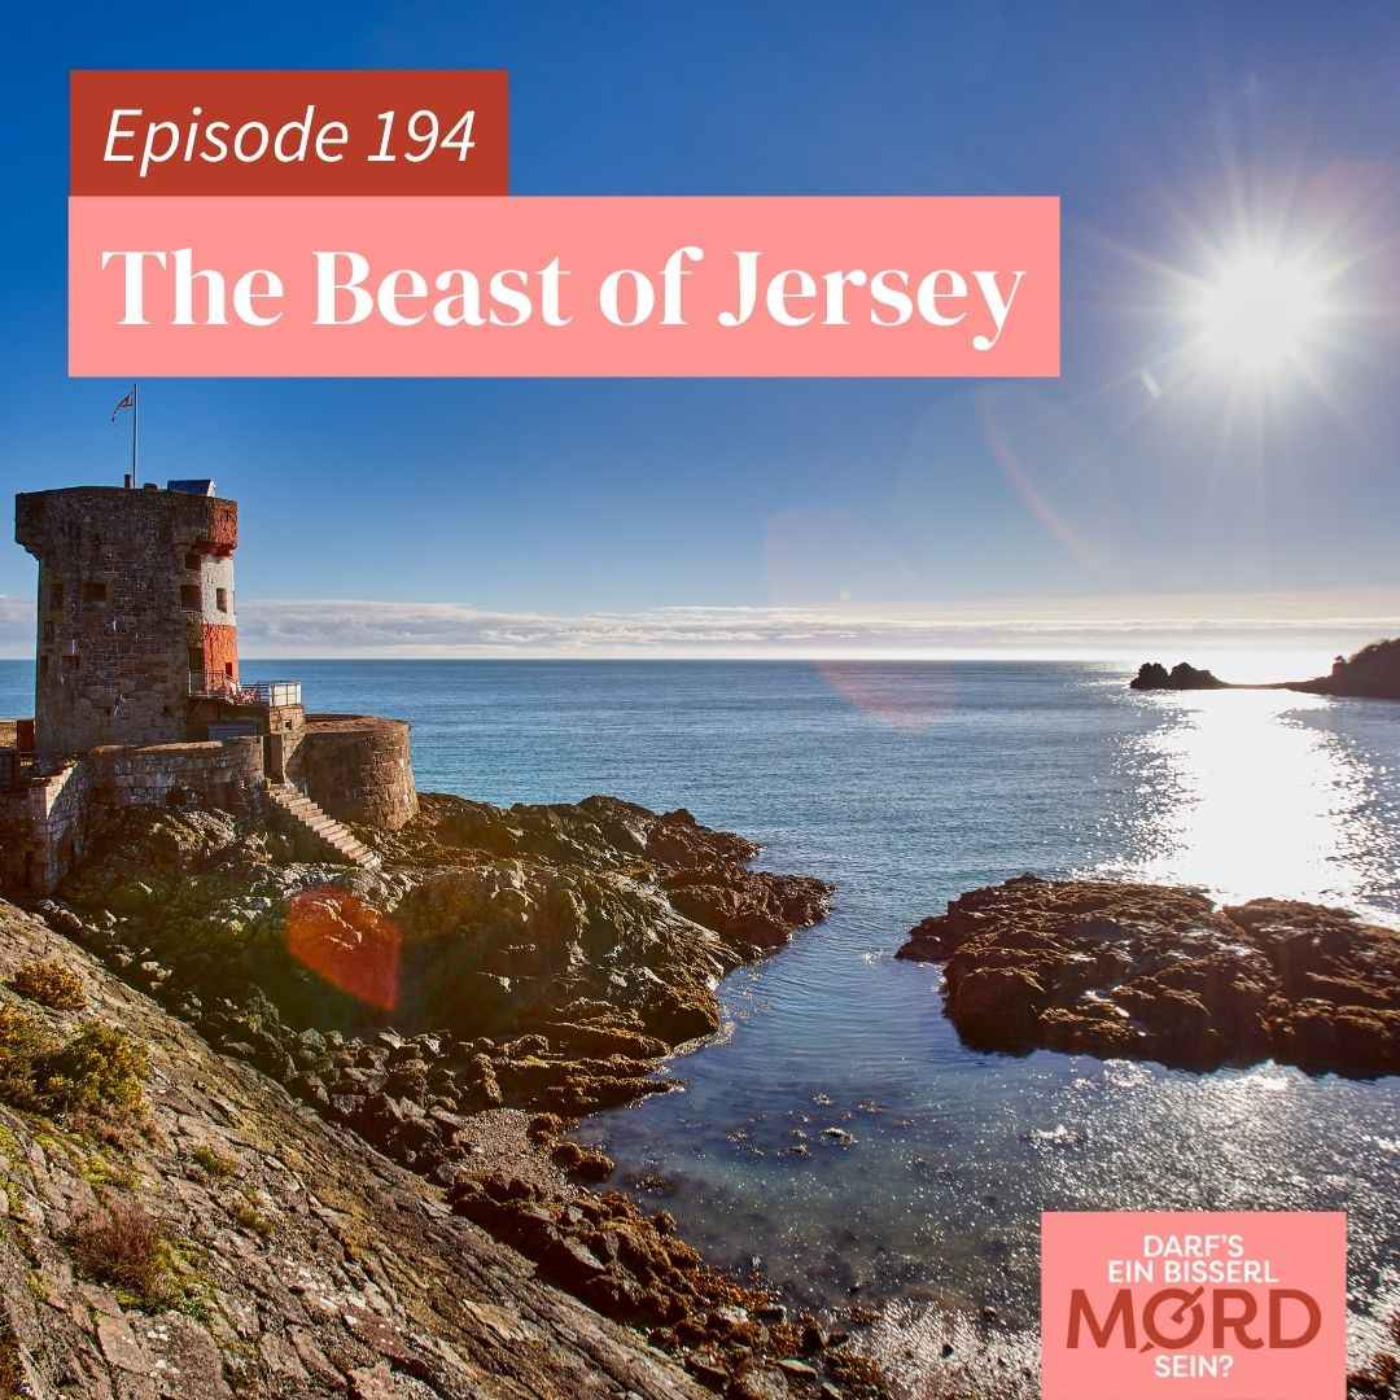 Episode 194: The Beast of Jersey